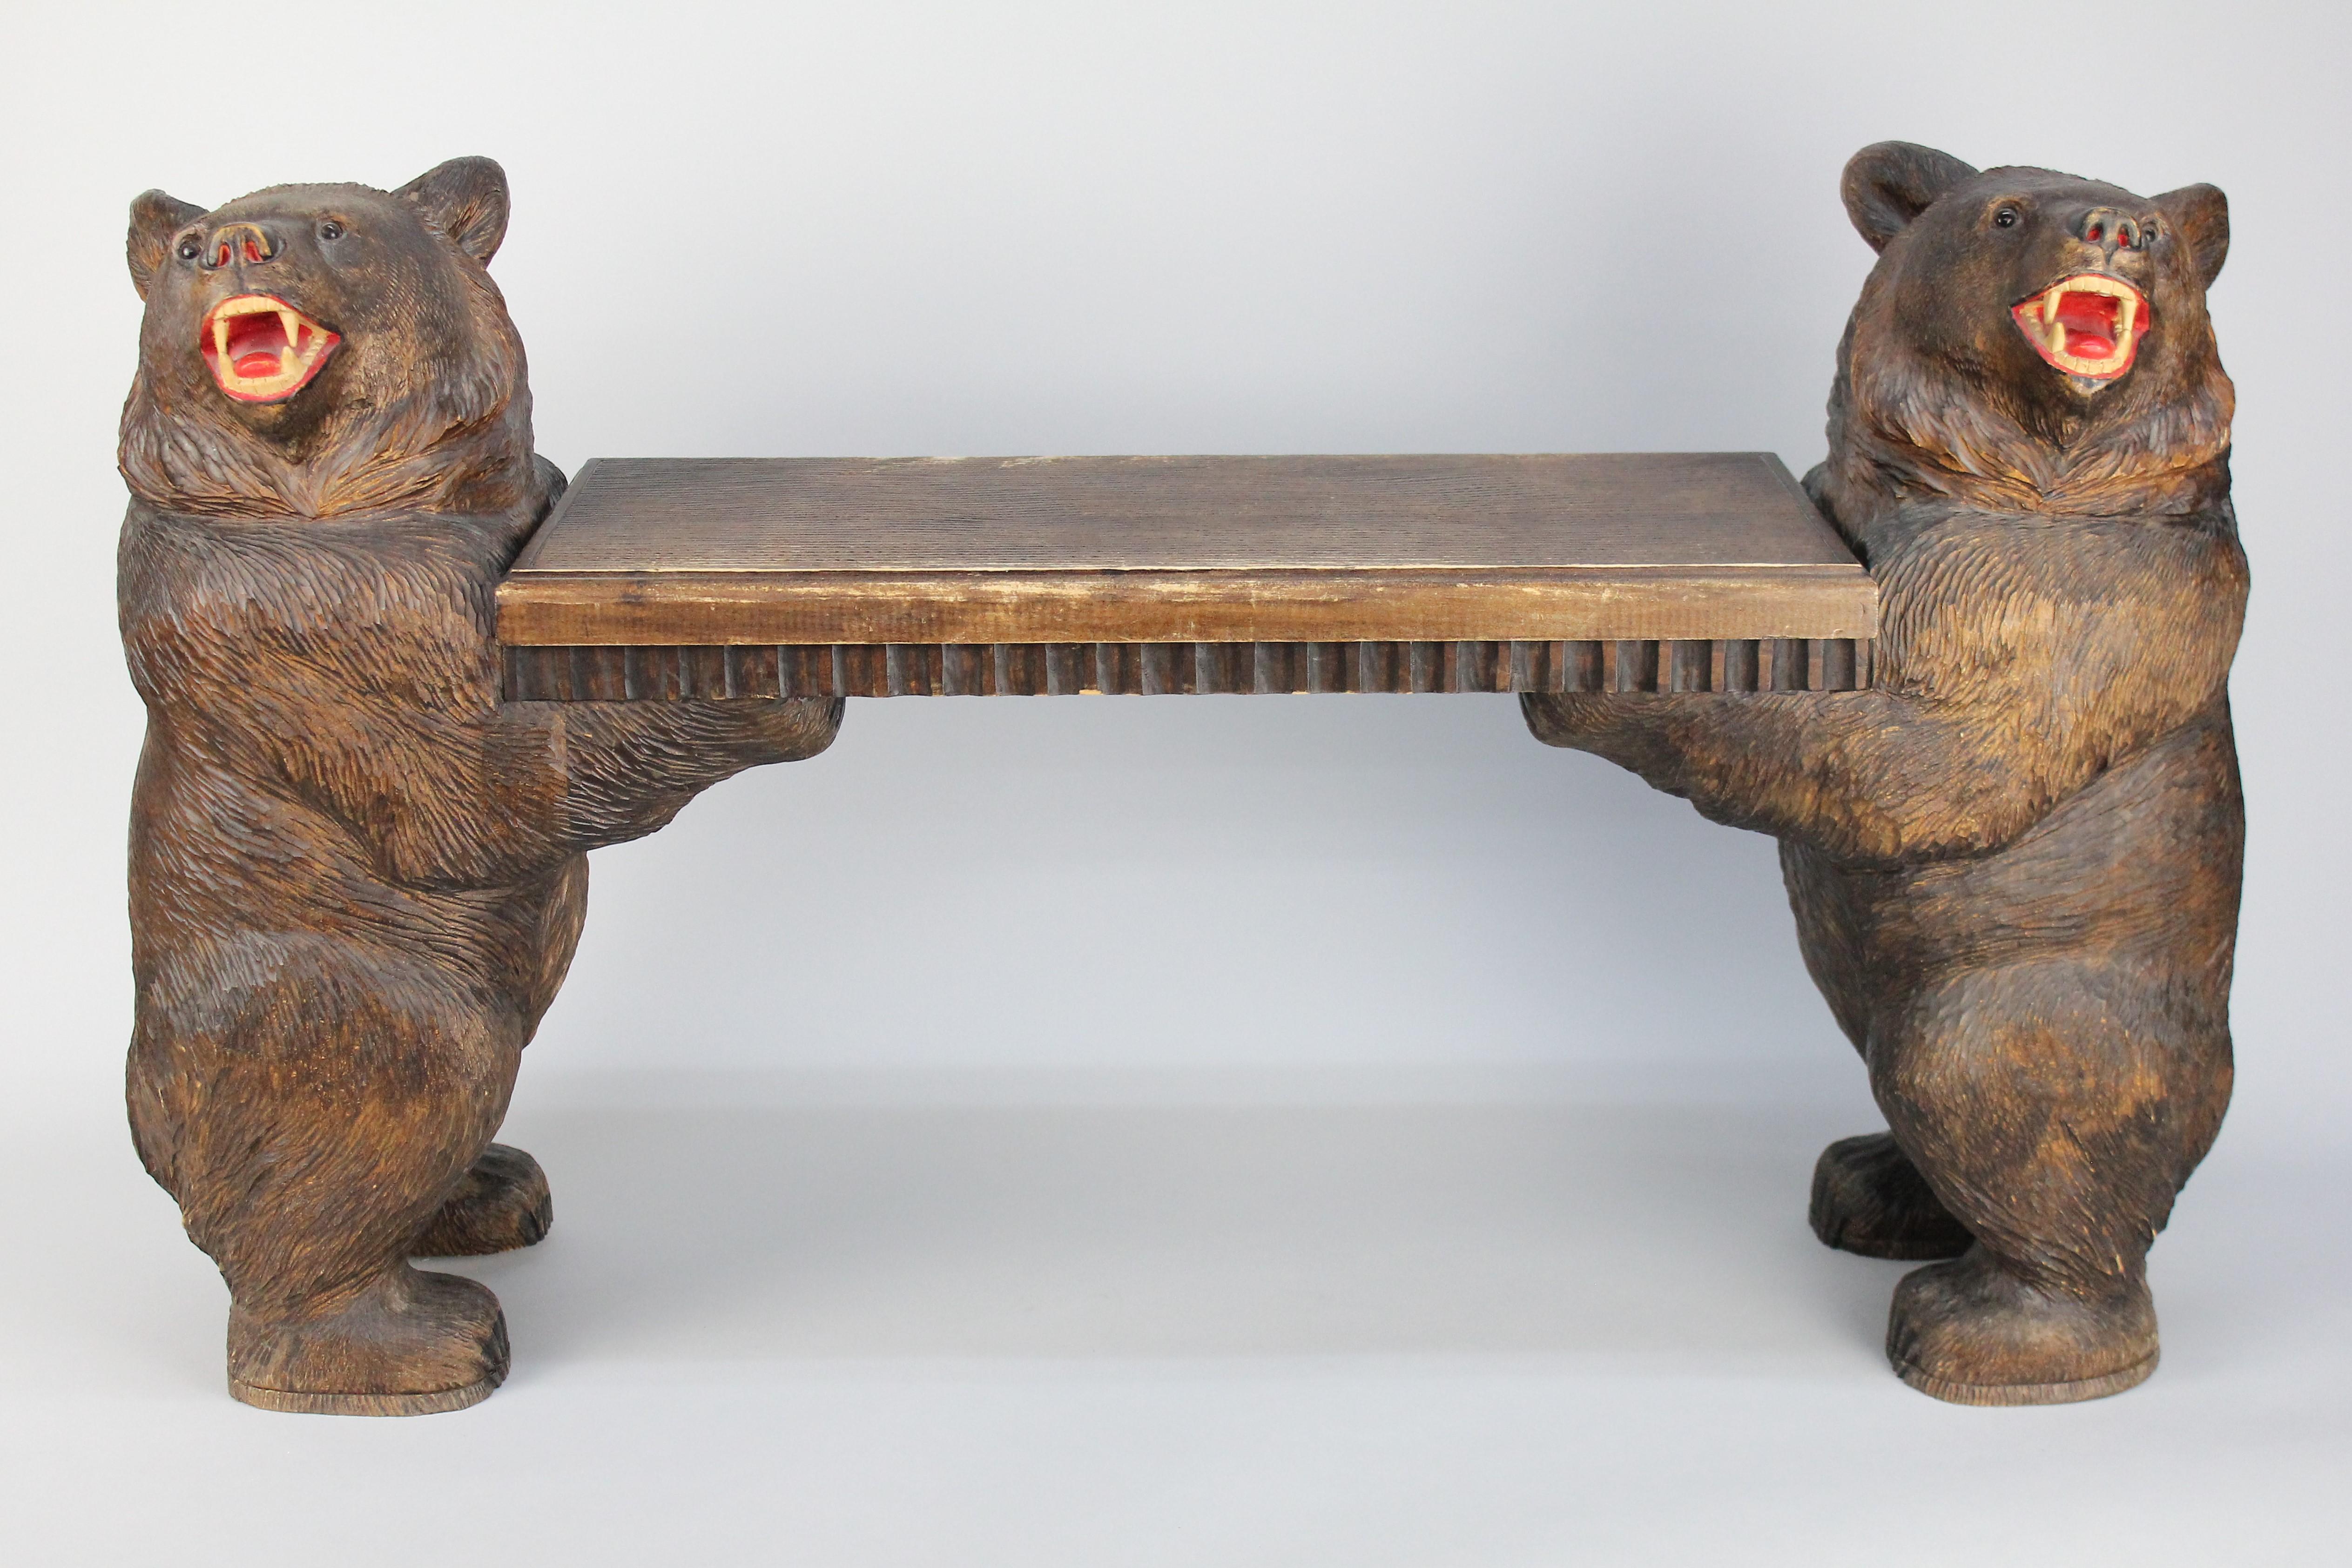 Wonderful Swiss Black Forest Bear stool or a small bench.
Handcarved in linden wood (limewood).
Many of these benches are fitted with a music box.
This is also prepared for a music box but there has never been one installed.
Great condition, no